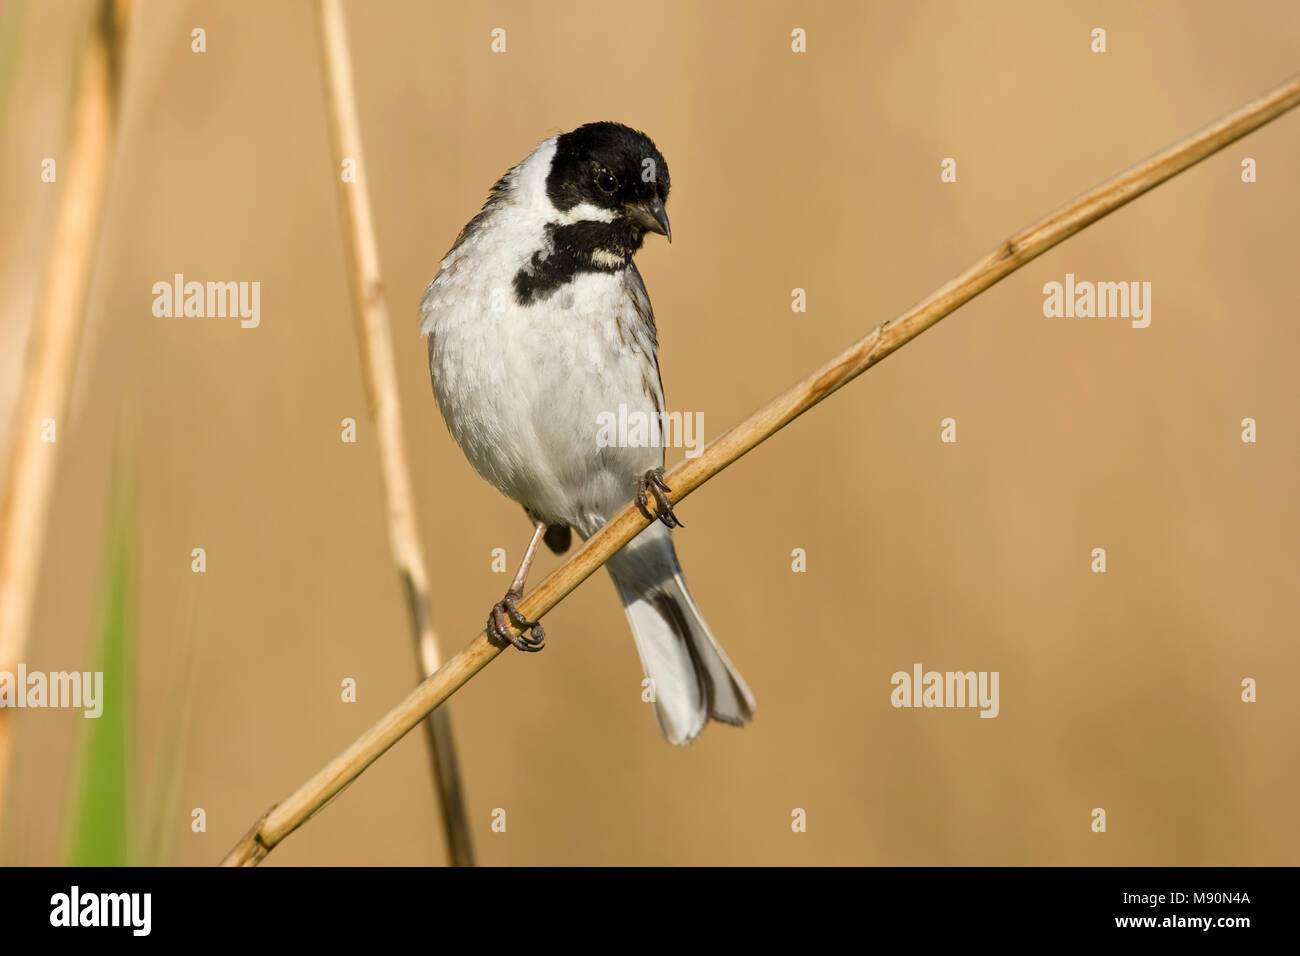 Mannetje Rietgors op rietstengel Nederland, Male Common Reed Bunting on reed stalk Netherlands Stock Photo